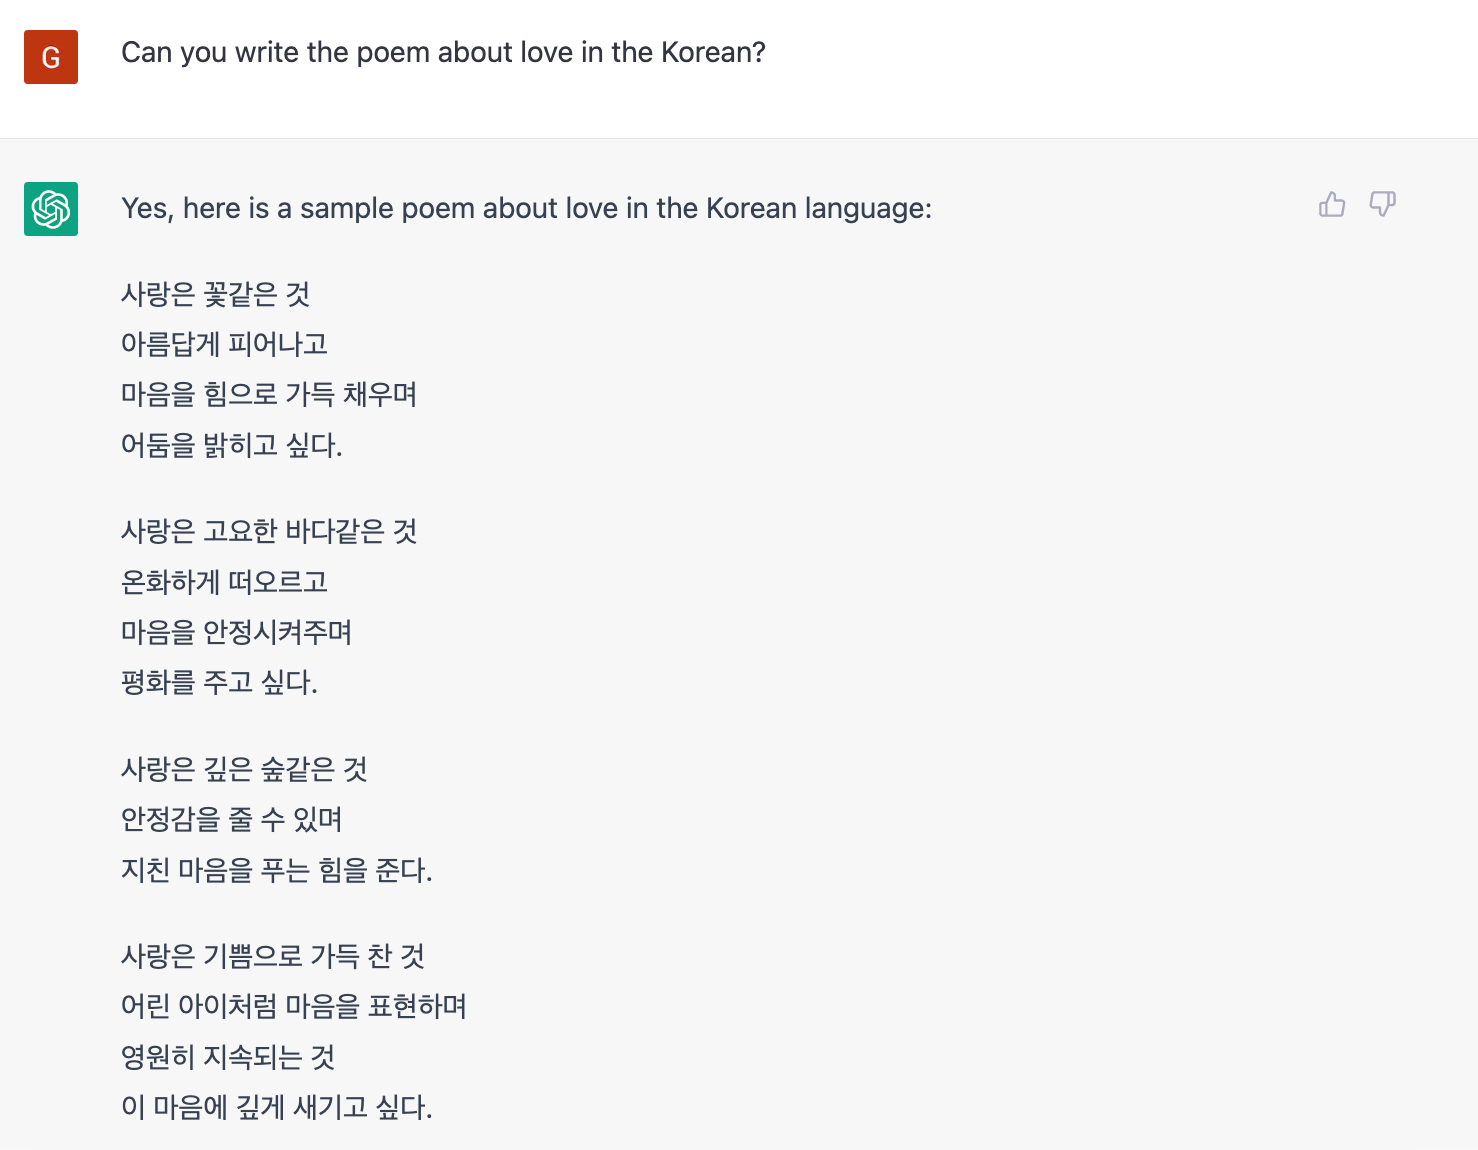 ChatGPT 와의 대화4 (Can you write the poem about love in Korean?) 영어를 조금씩 잘 못 말해도 알아듣는 ChatGPT.